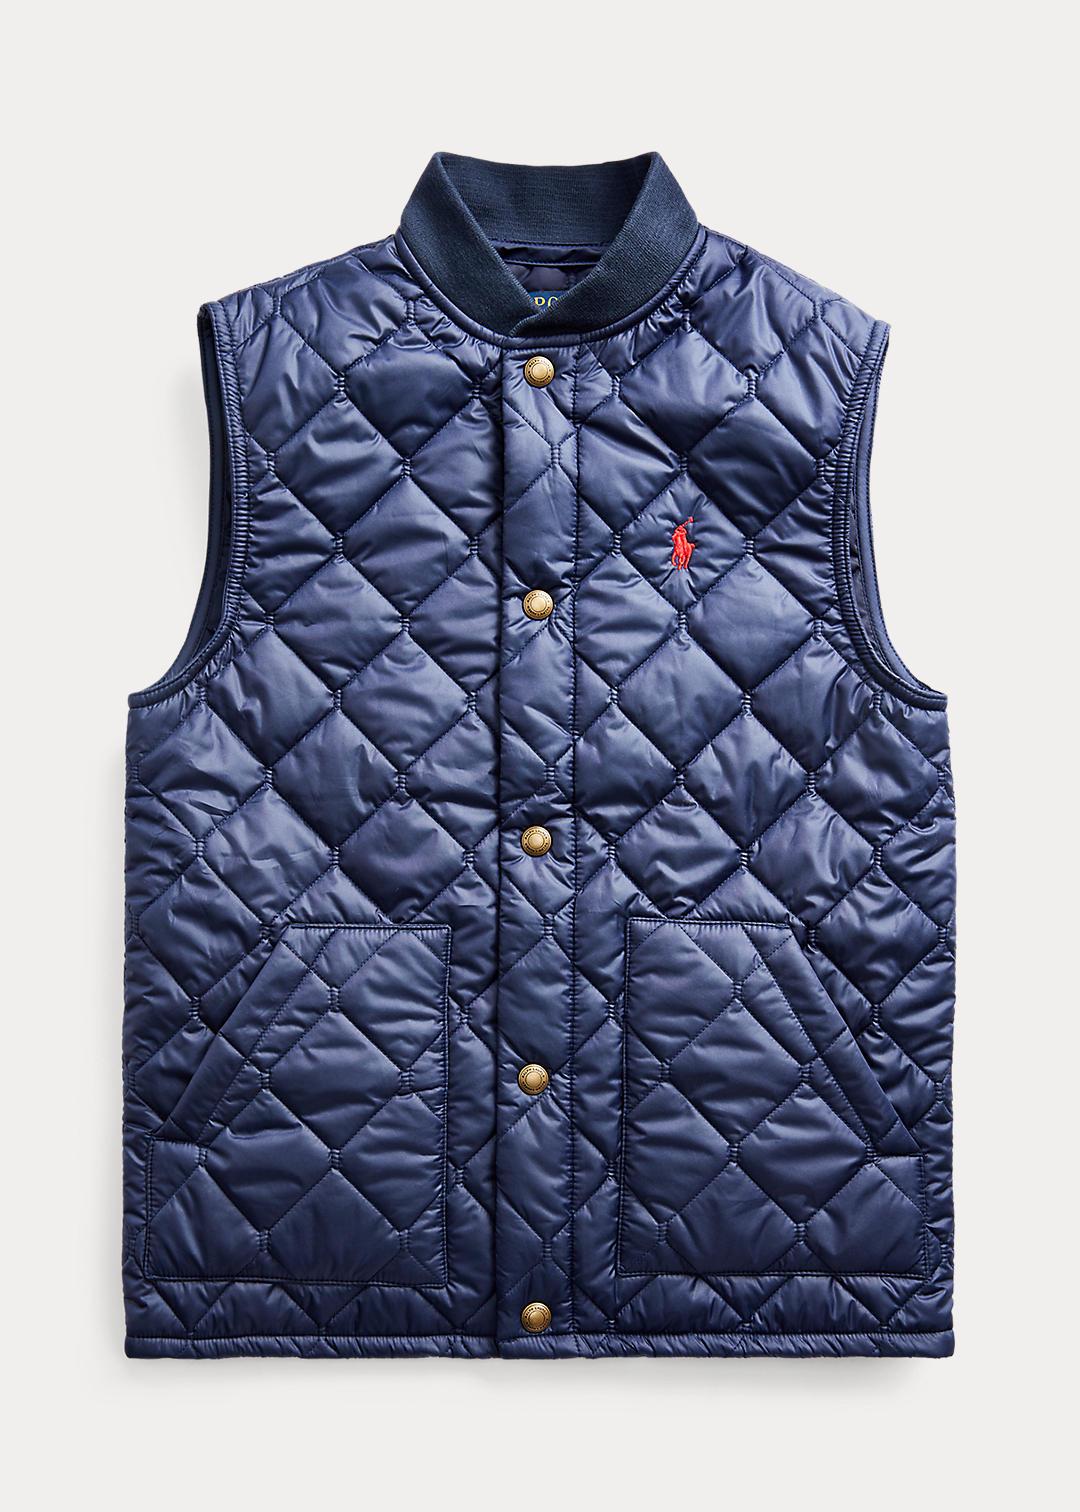 BOYS 6-14 YEARS Quilted Vest 1